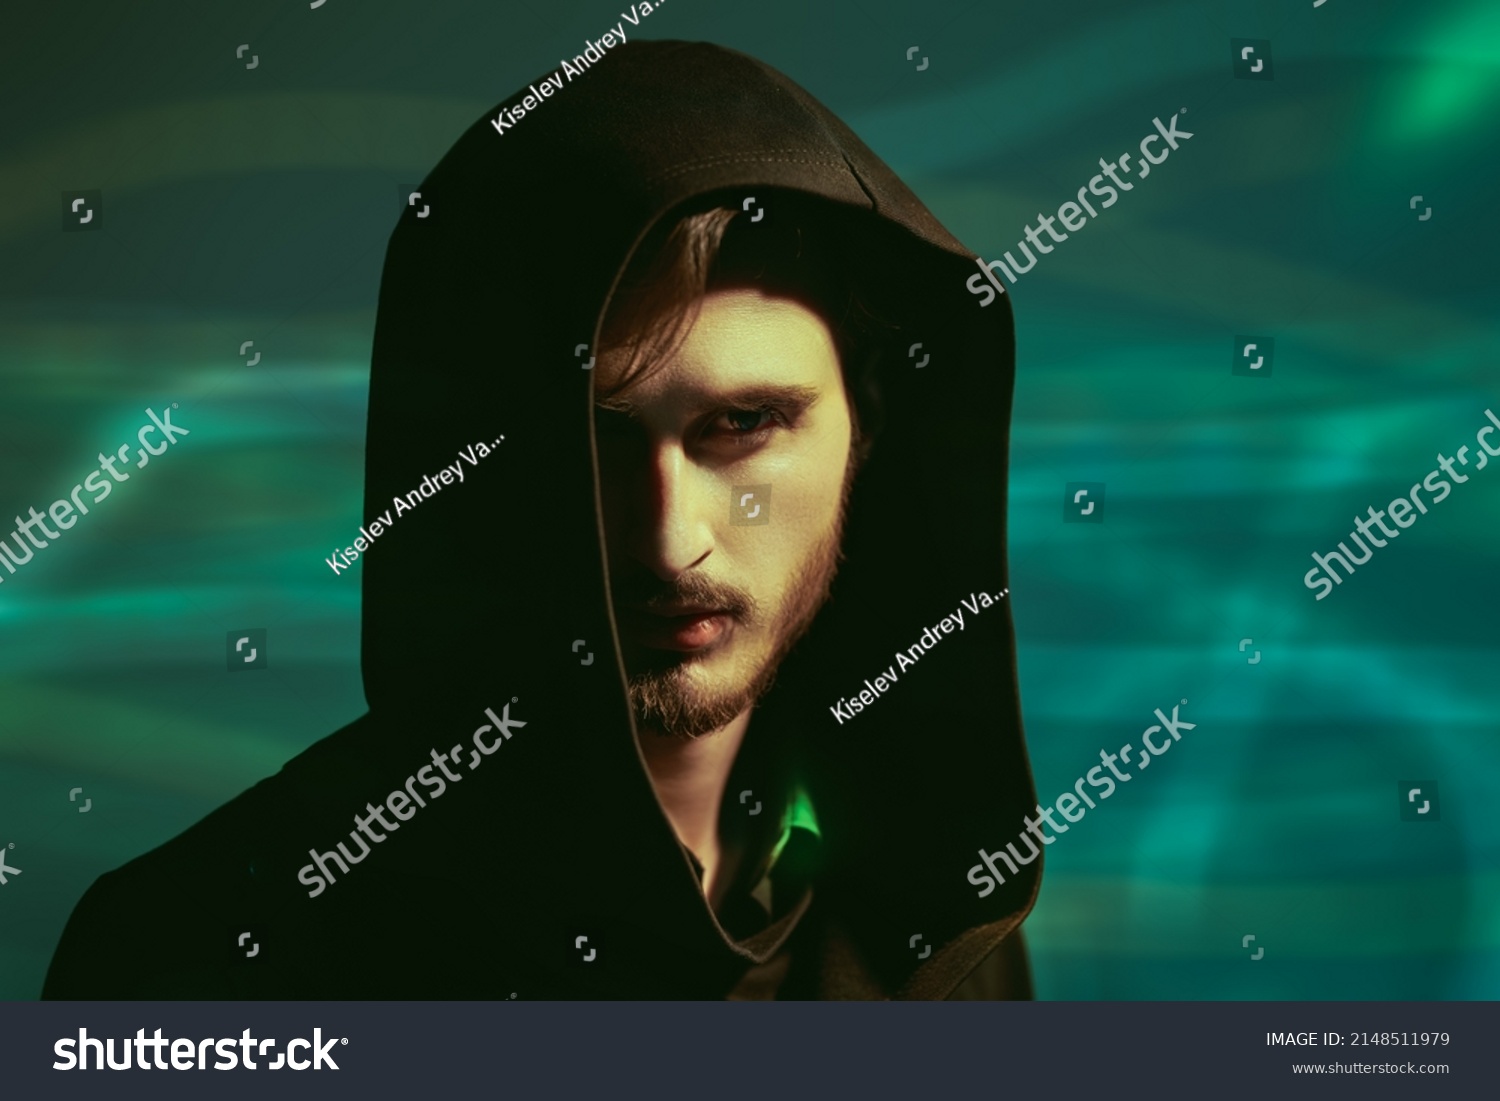 Studio portrait of a brutal brunette man looking intently and cautiously at the camera from under a black hood. Green background. People and emotions.  #2148511979